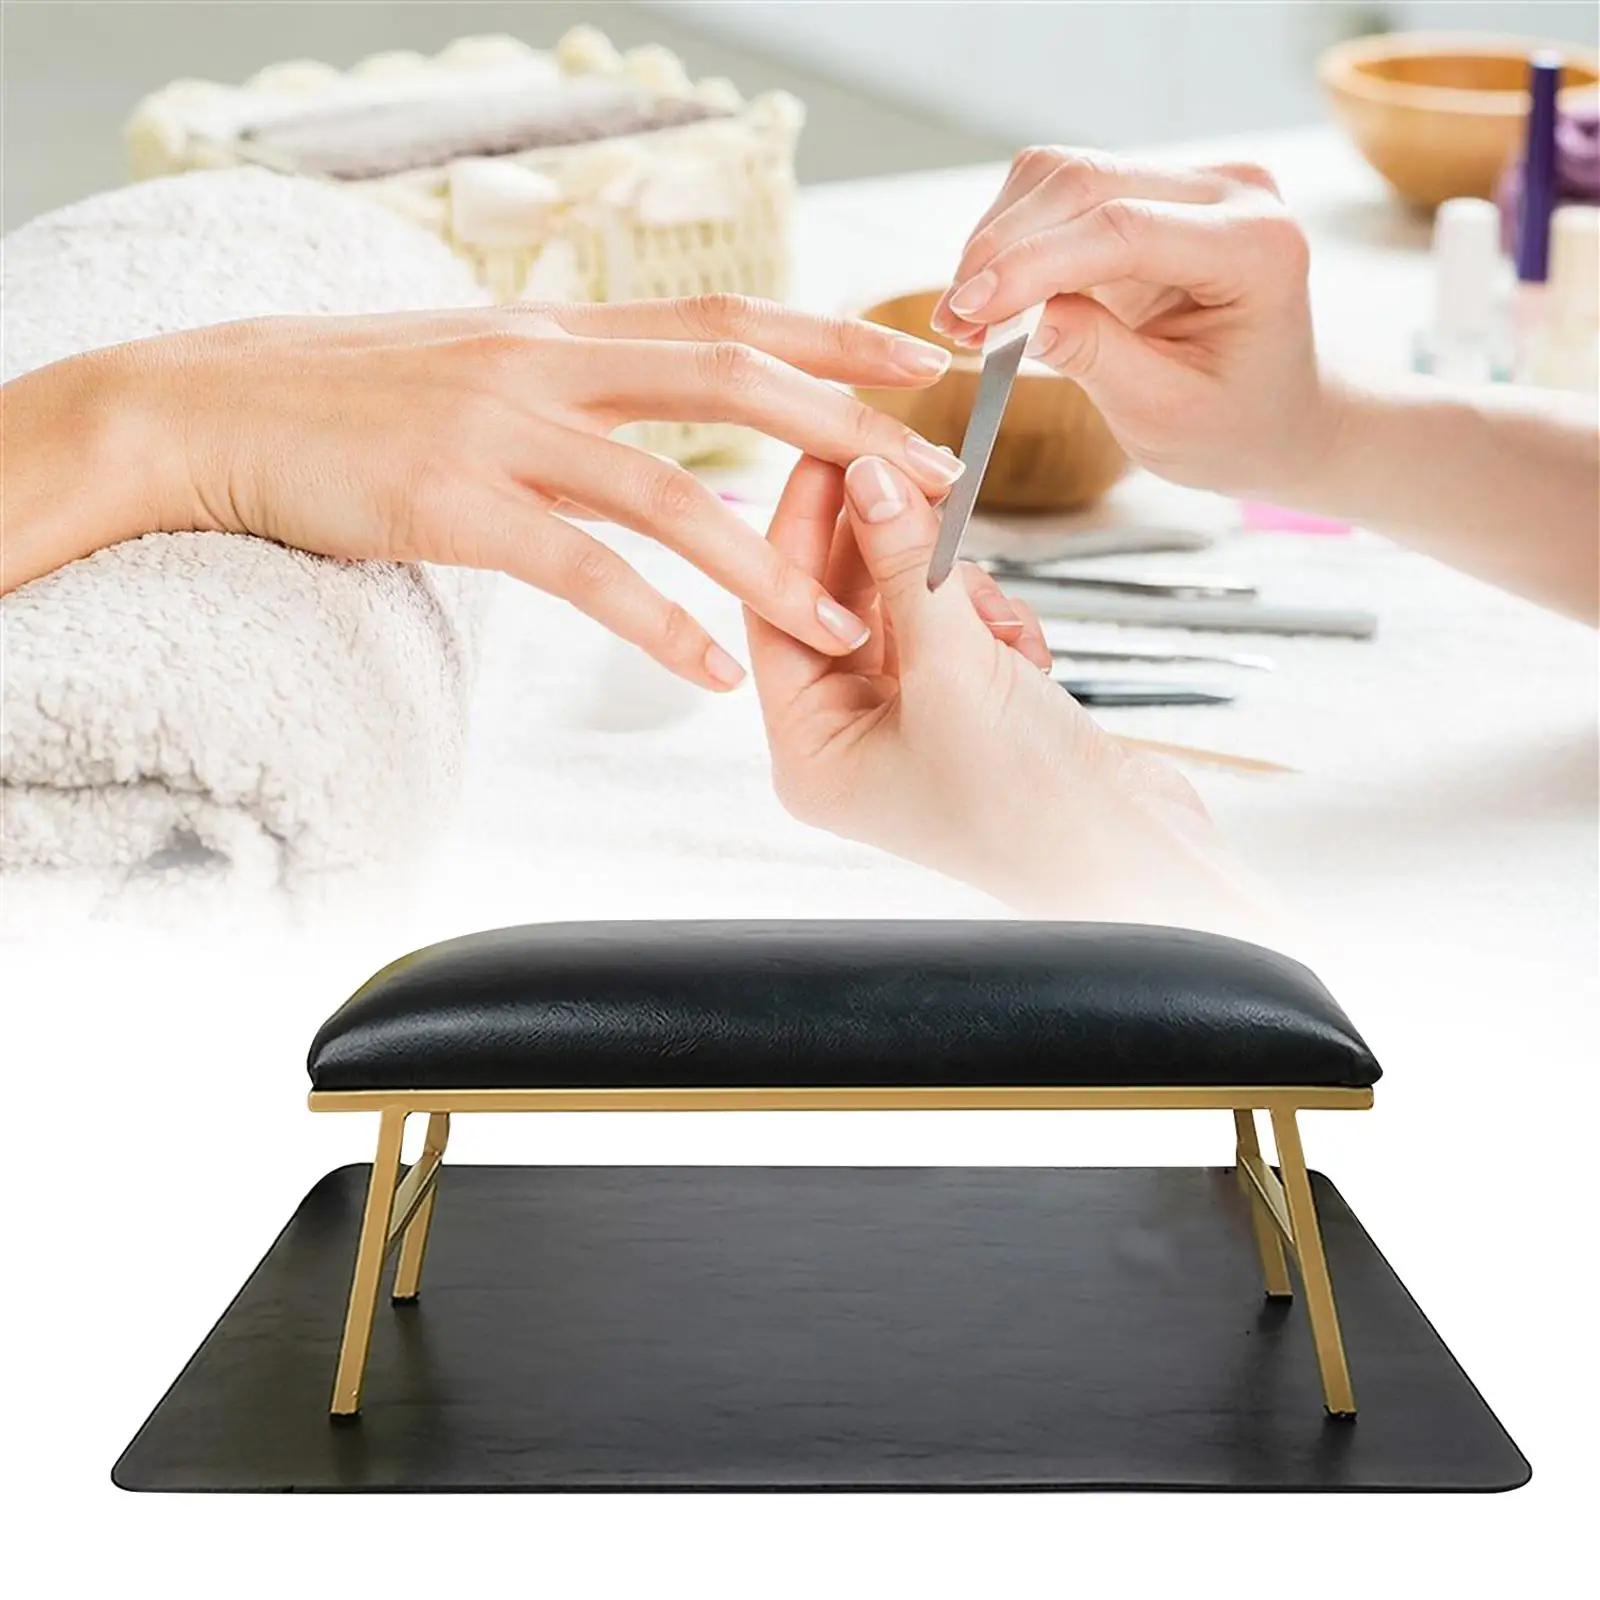 Nail Art Hand Pillow and Mat Non Slip PU Leather Desk Table Nail Hand Rest Holder for Home Salon Manicurist Hand Nail Techs Use